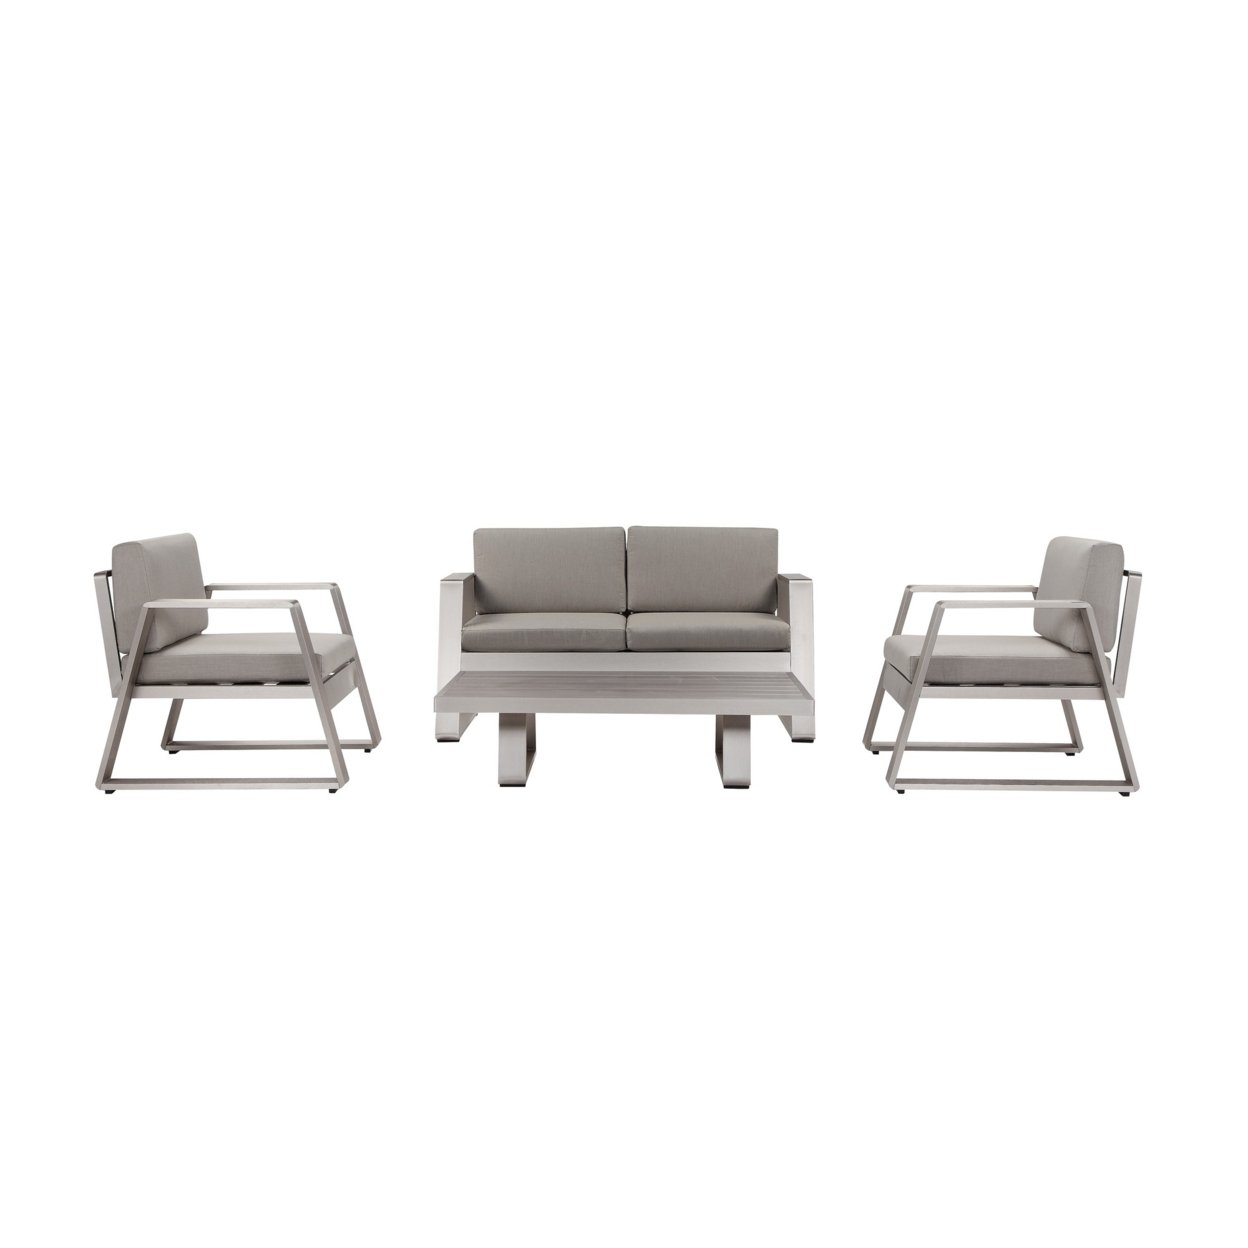 4 Piece Patio Sofa Set With Sled Base And Floor Protector, Gray And Silver- Saltoro Sherpi